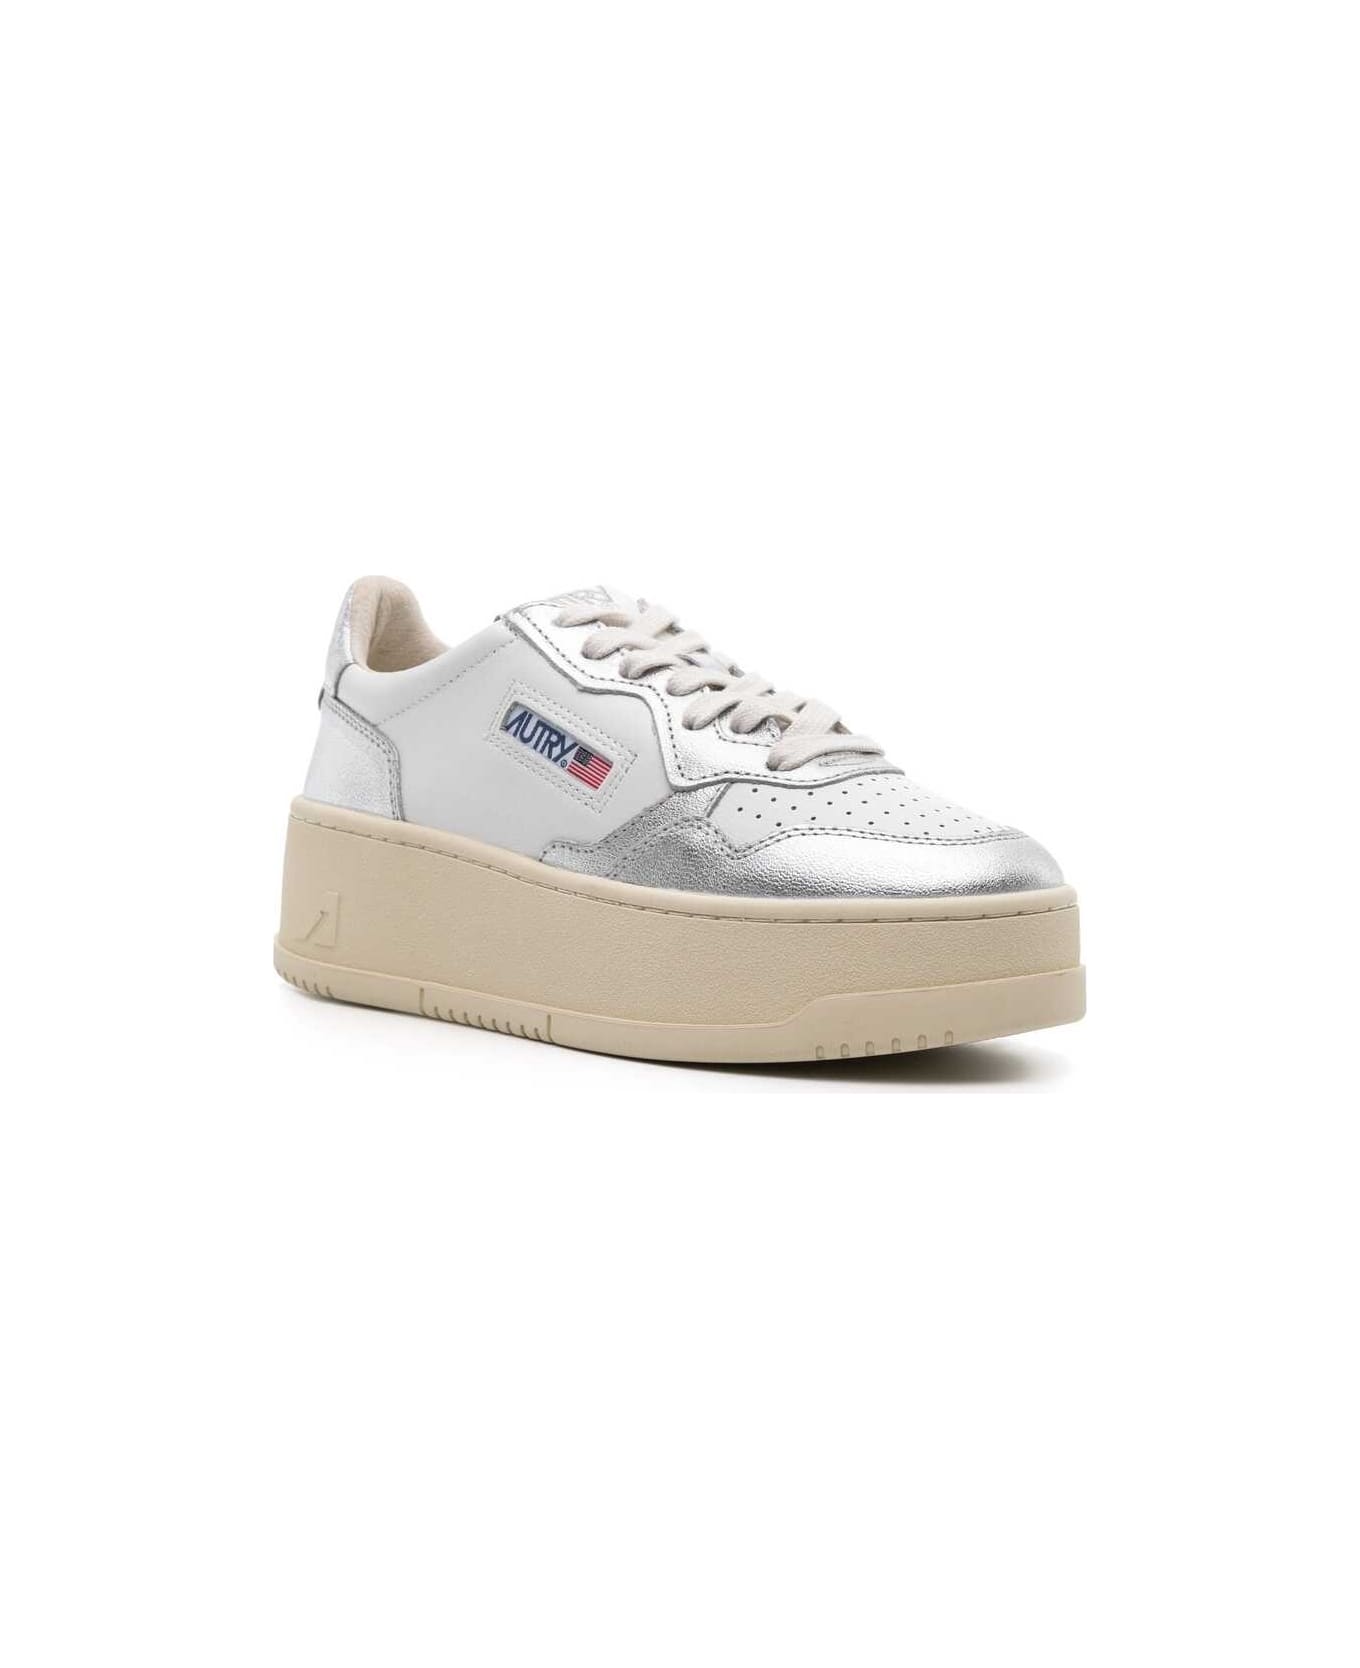 Autry White And Silver Medalist Platform Low Sneakers - Silver